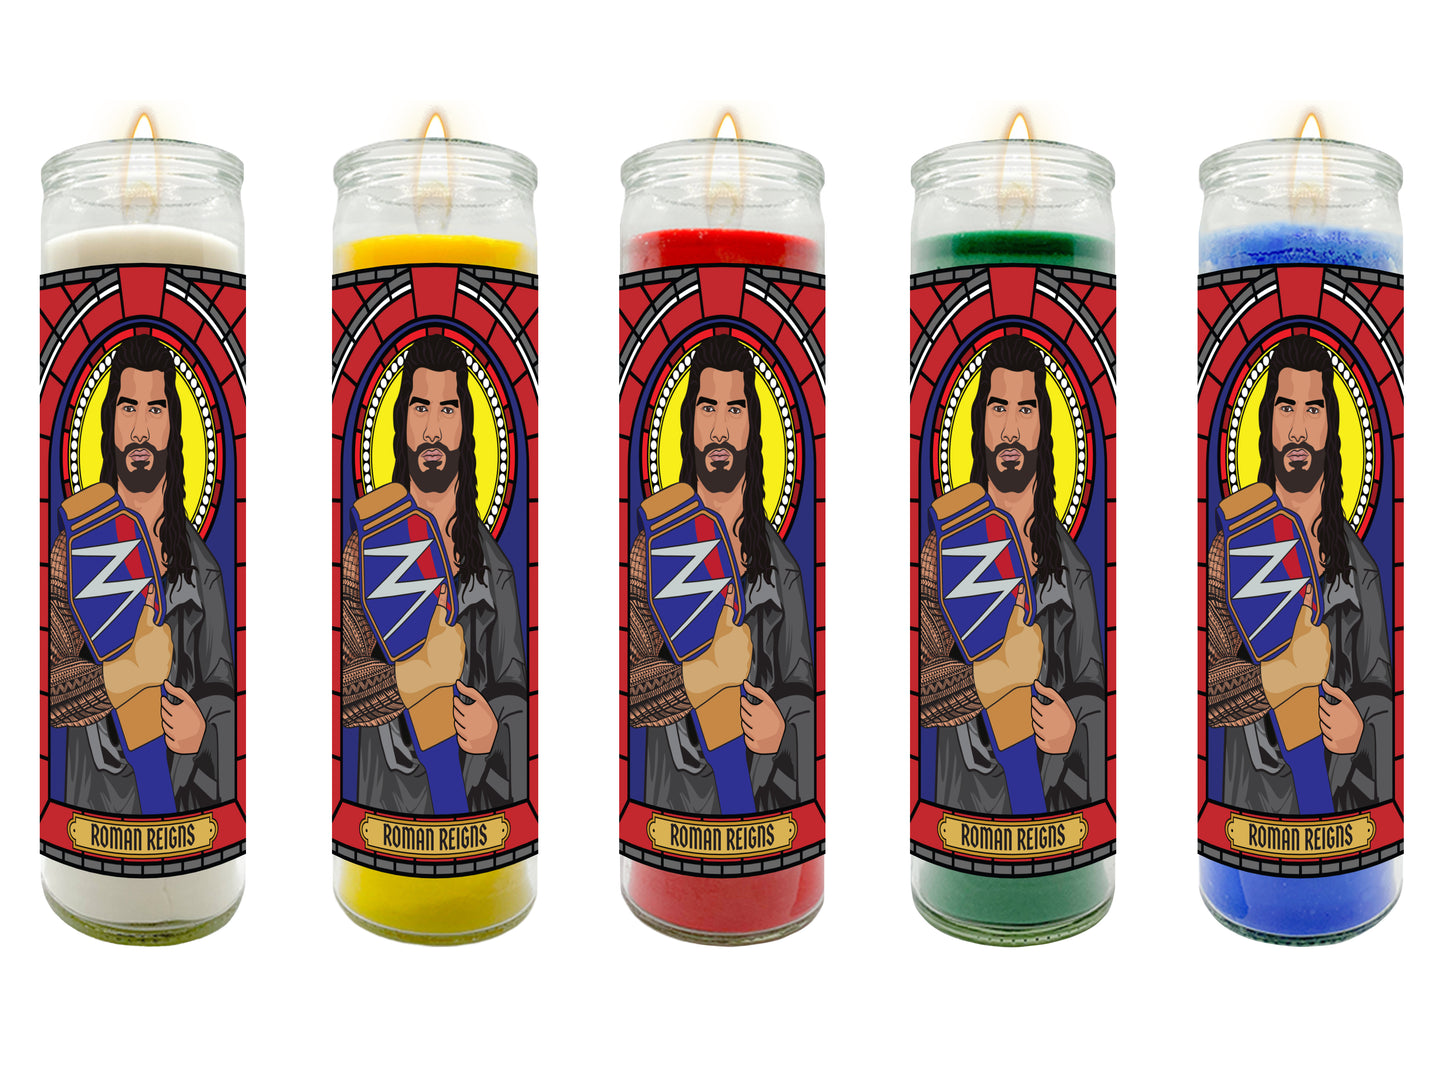 Roman Reigns Professional Wrestler Illustrated Prayer Candle